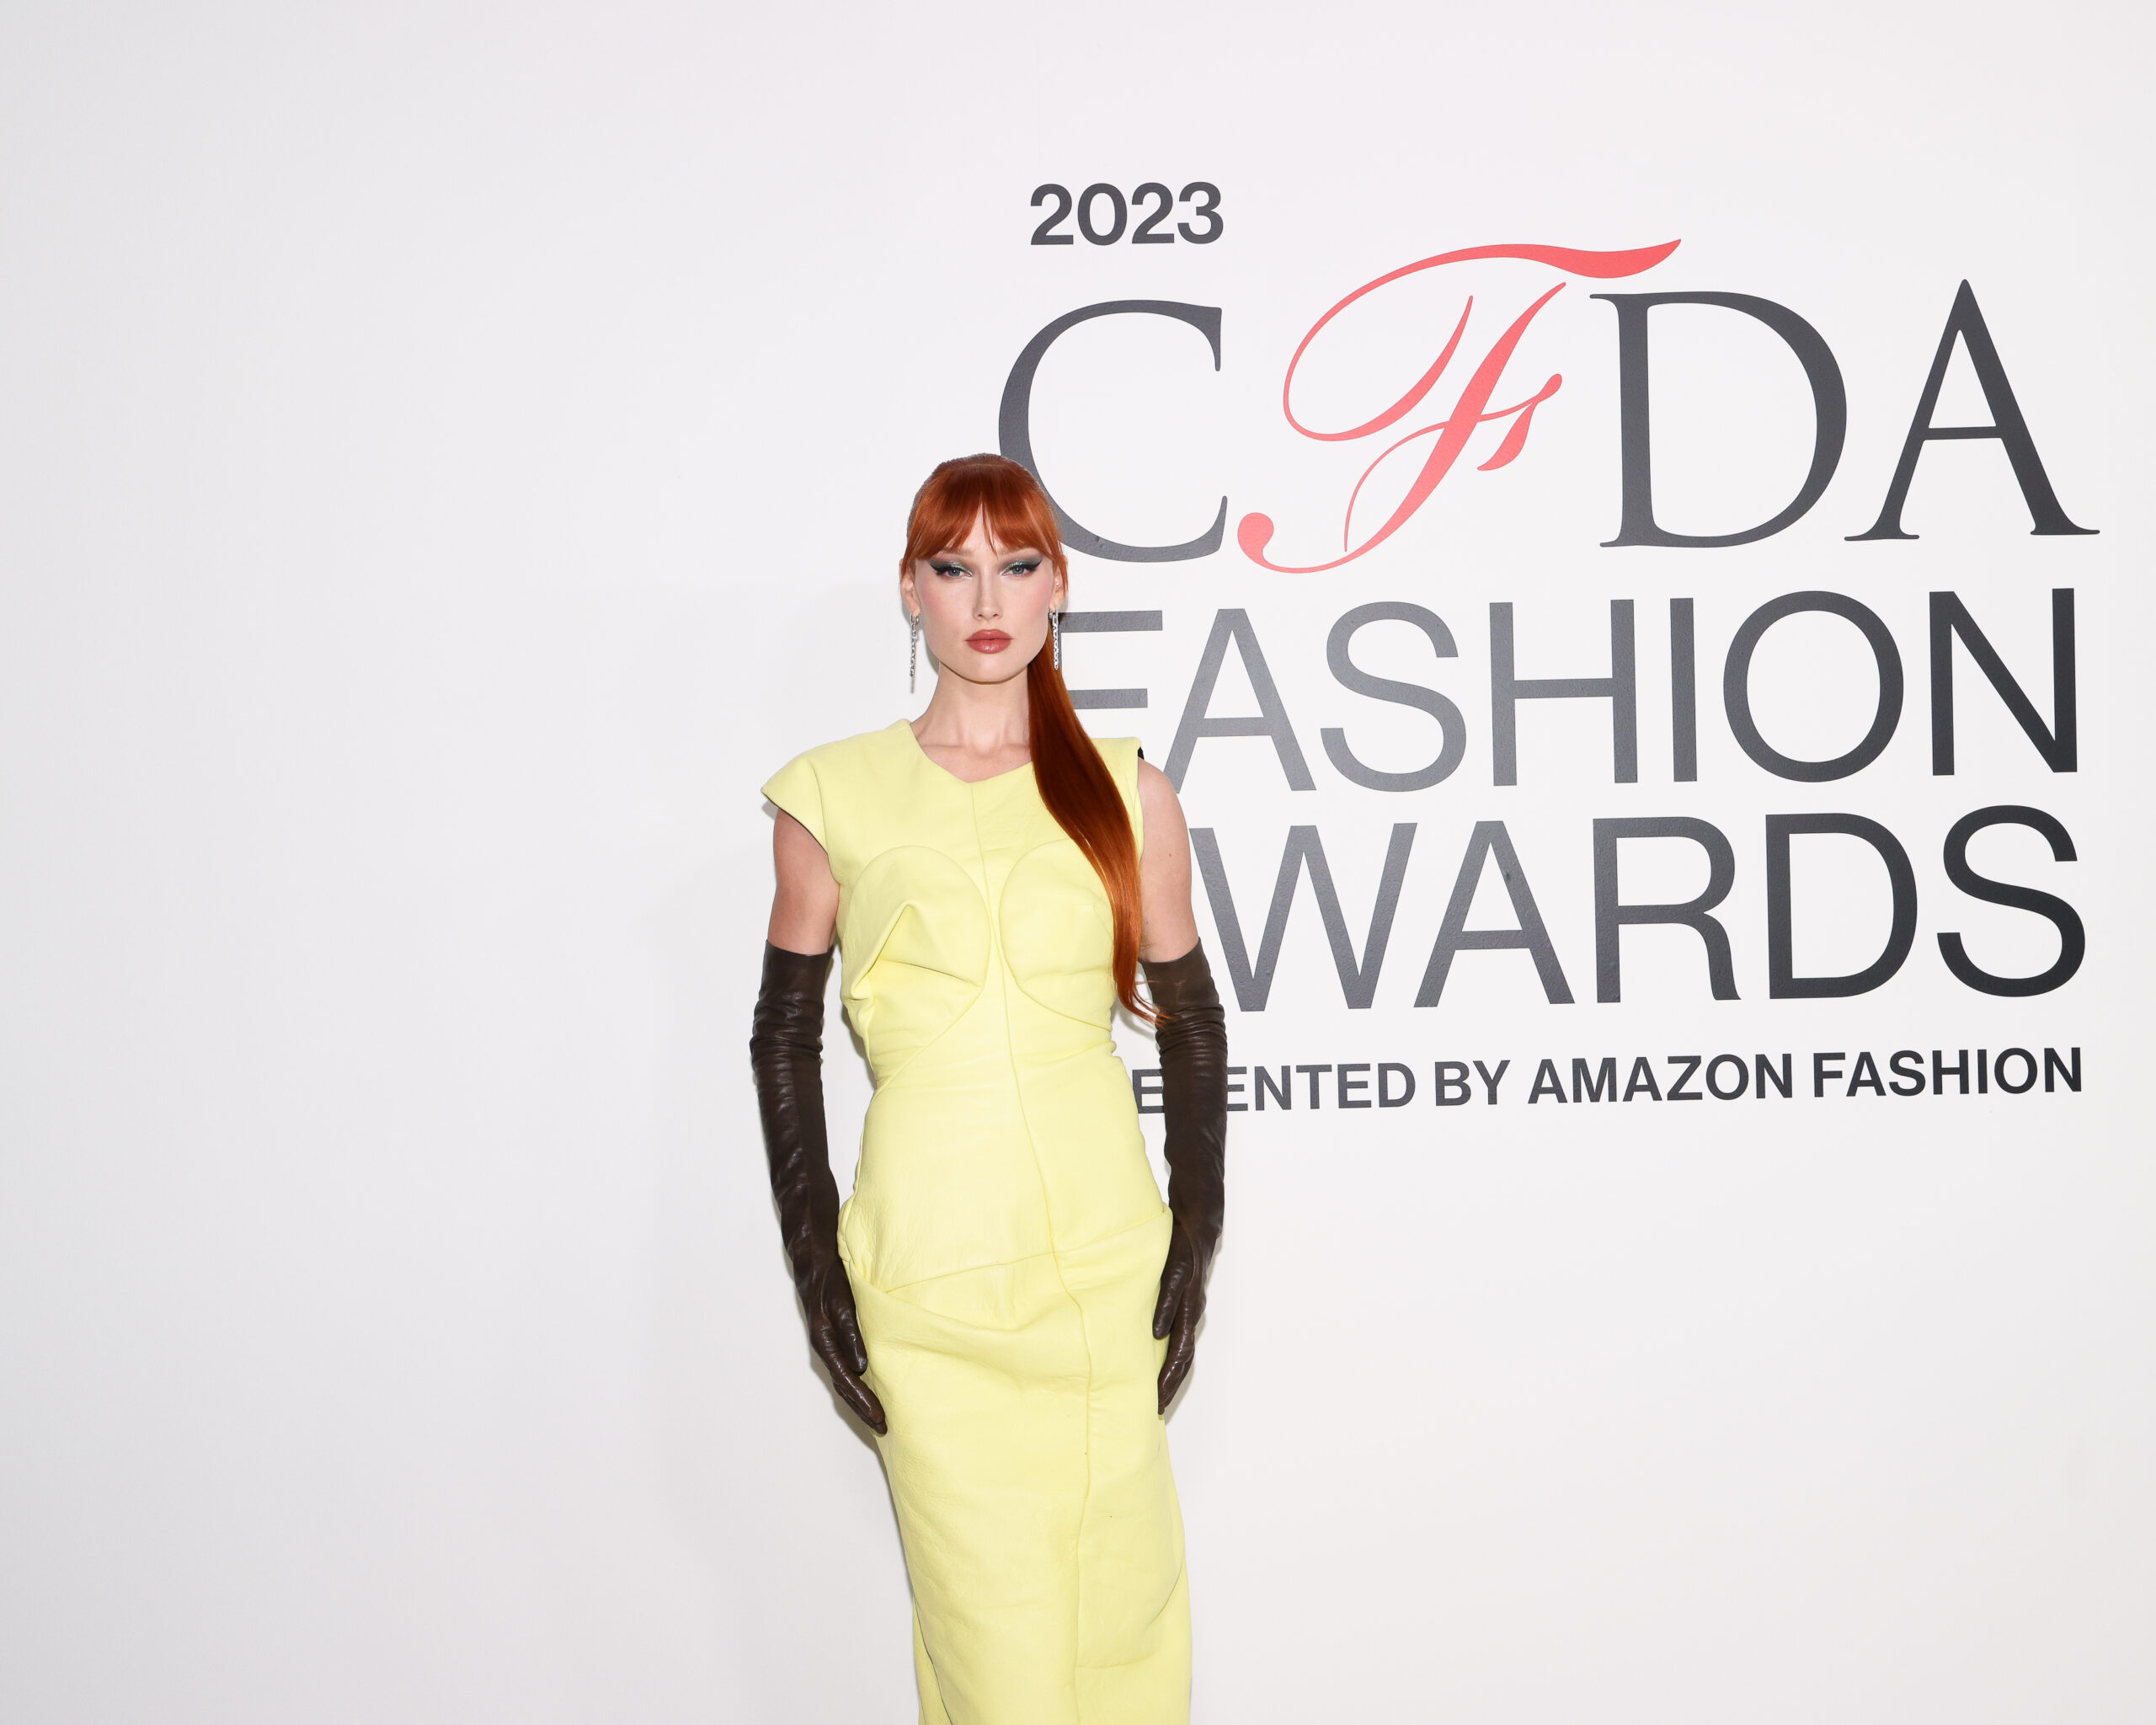 Radiant in Citrus Tones: A striking figure at the CFDA Fashion Awards, Meredith Duxbury enchants in a lemon yellow Marc Jacobs SS23 ready-to-wear dress, complemented with elegant elbow-length gloves, bold platform boots, and sparkling David Yurman earrings.